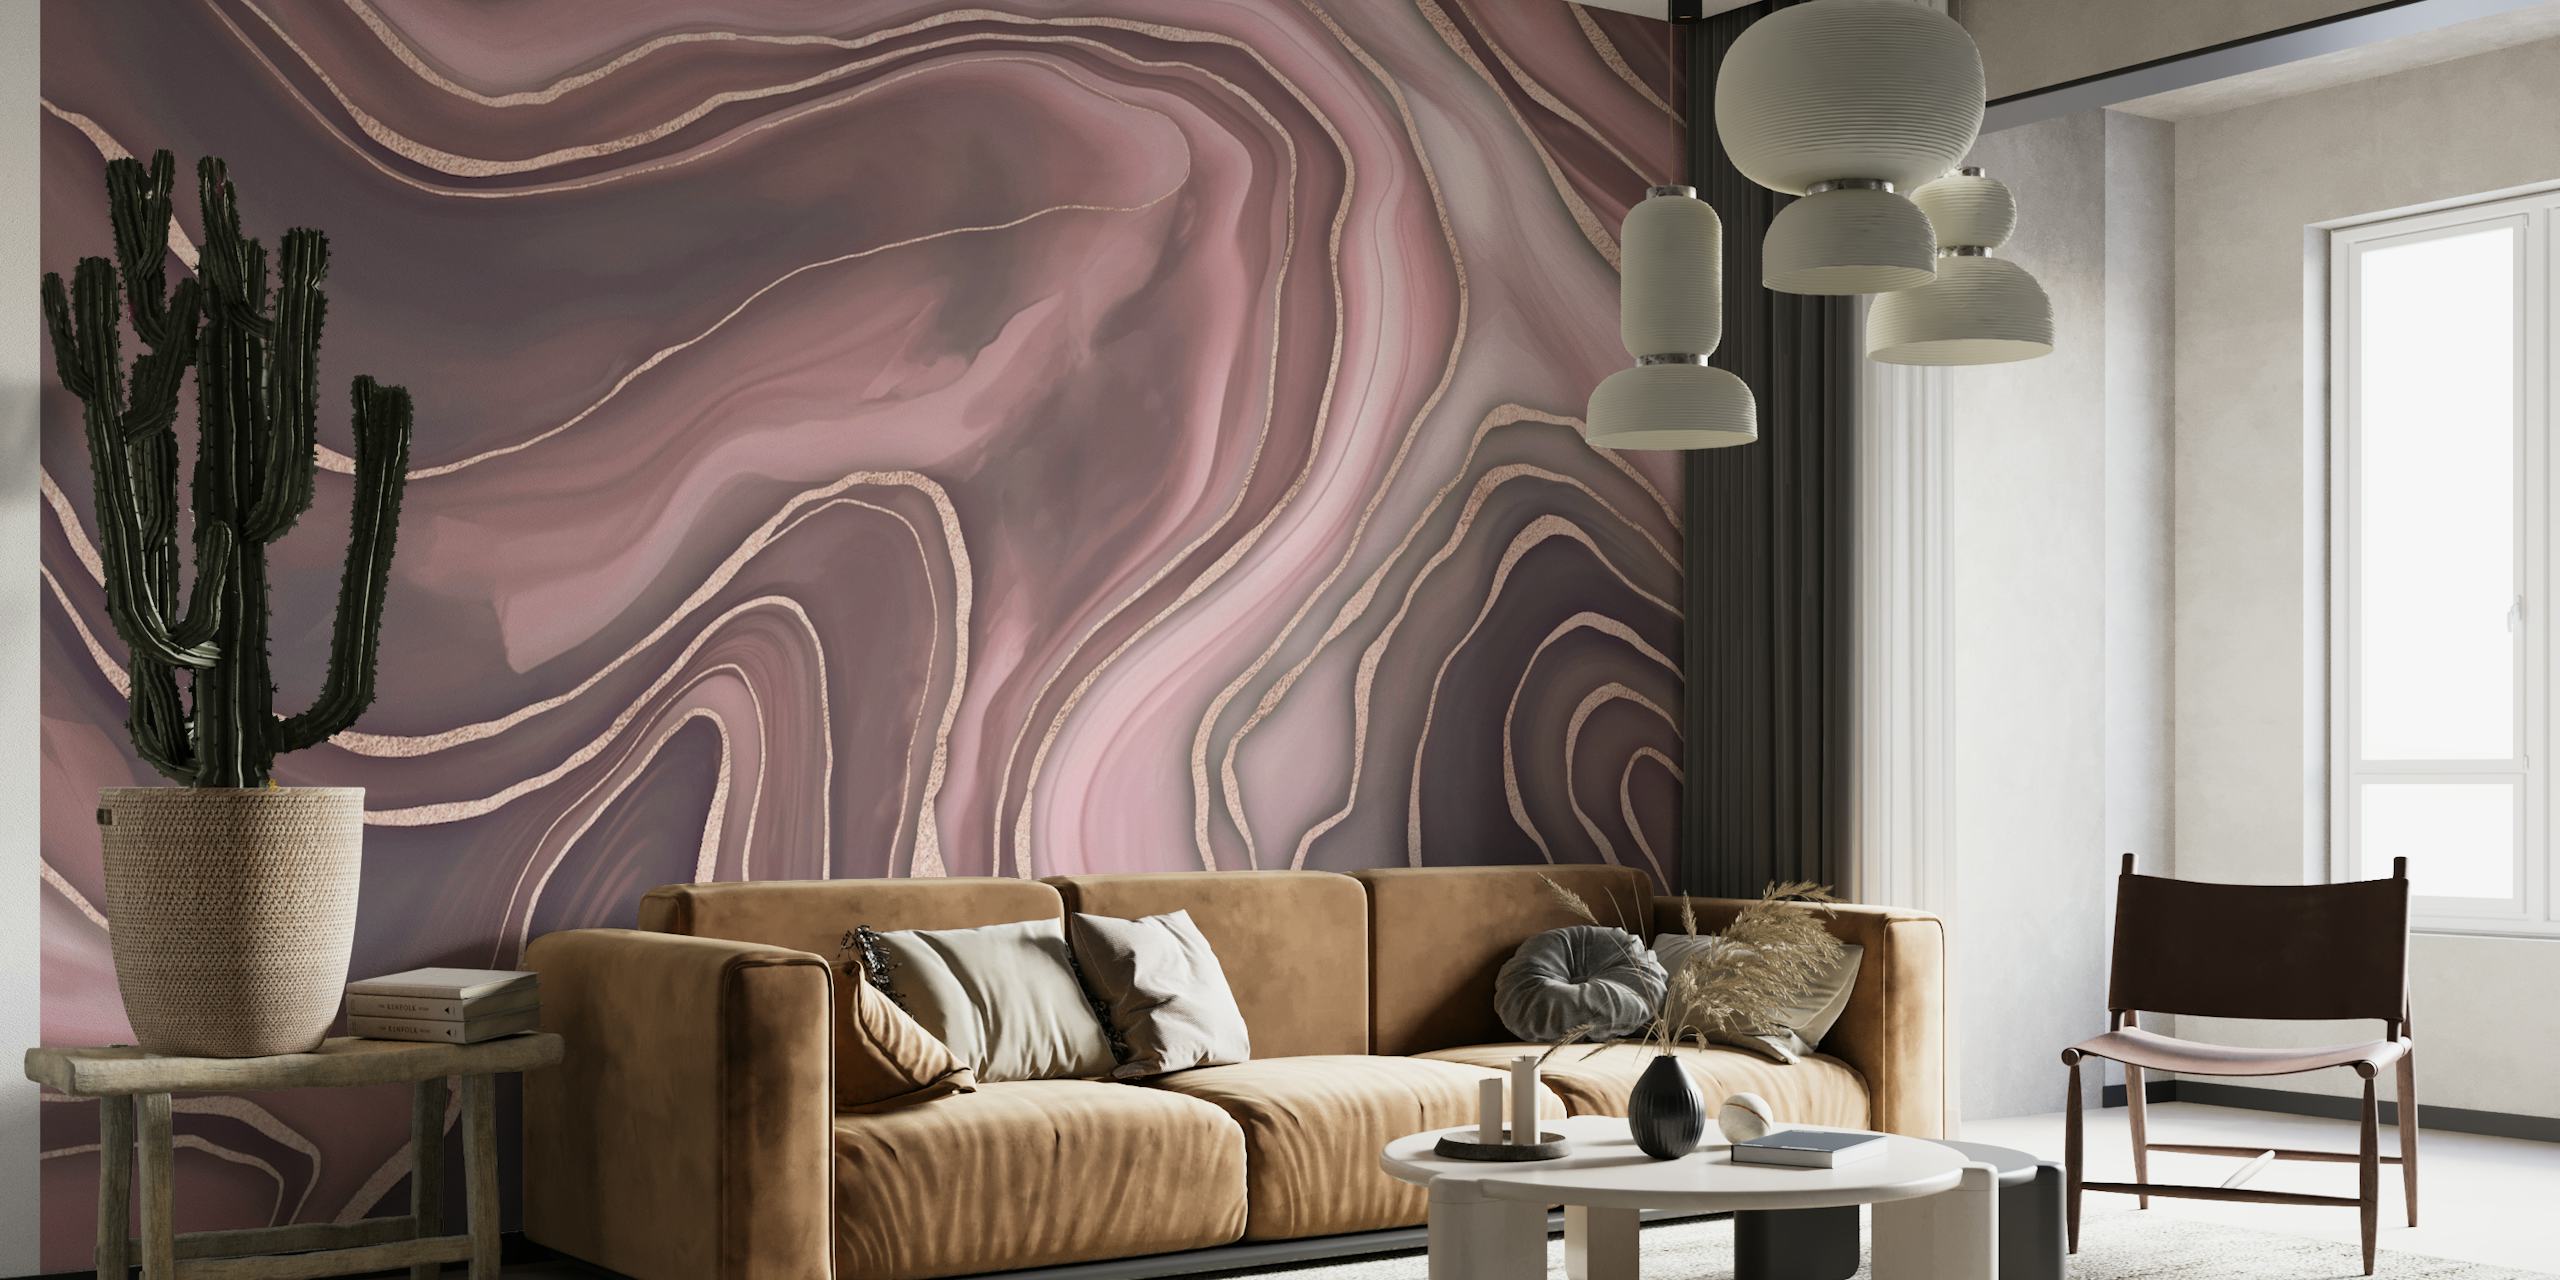 Marble Reverie Rose Gold wall mural with elegant swirls of rose, taupe, and charcoal